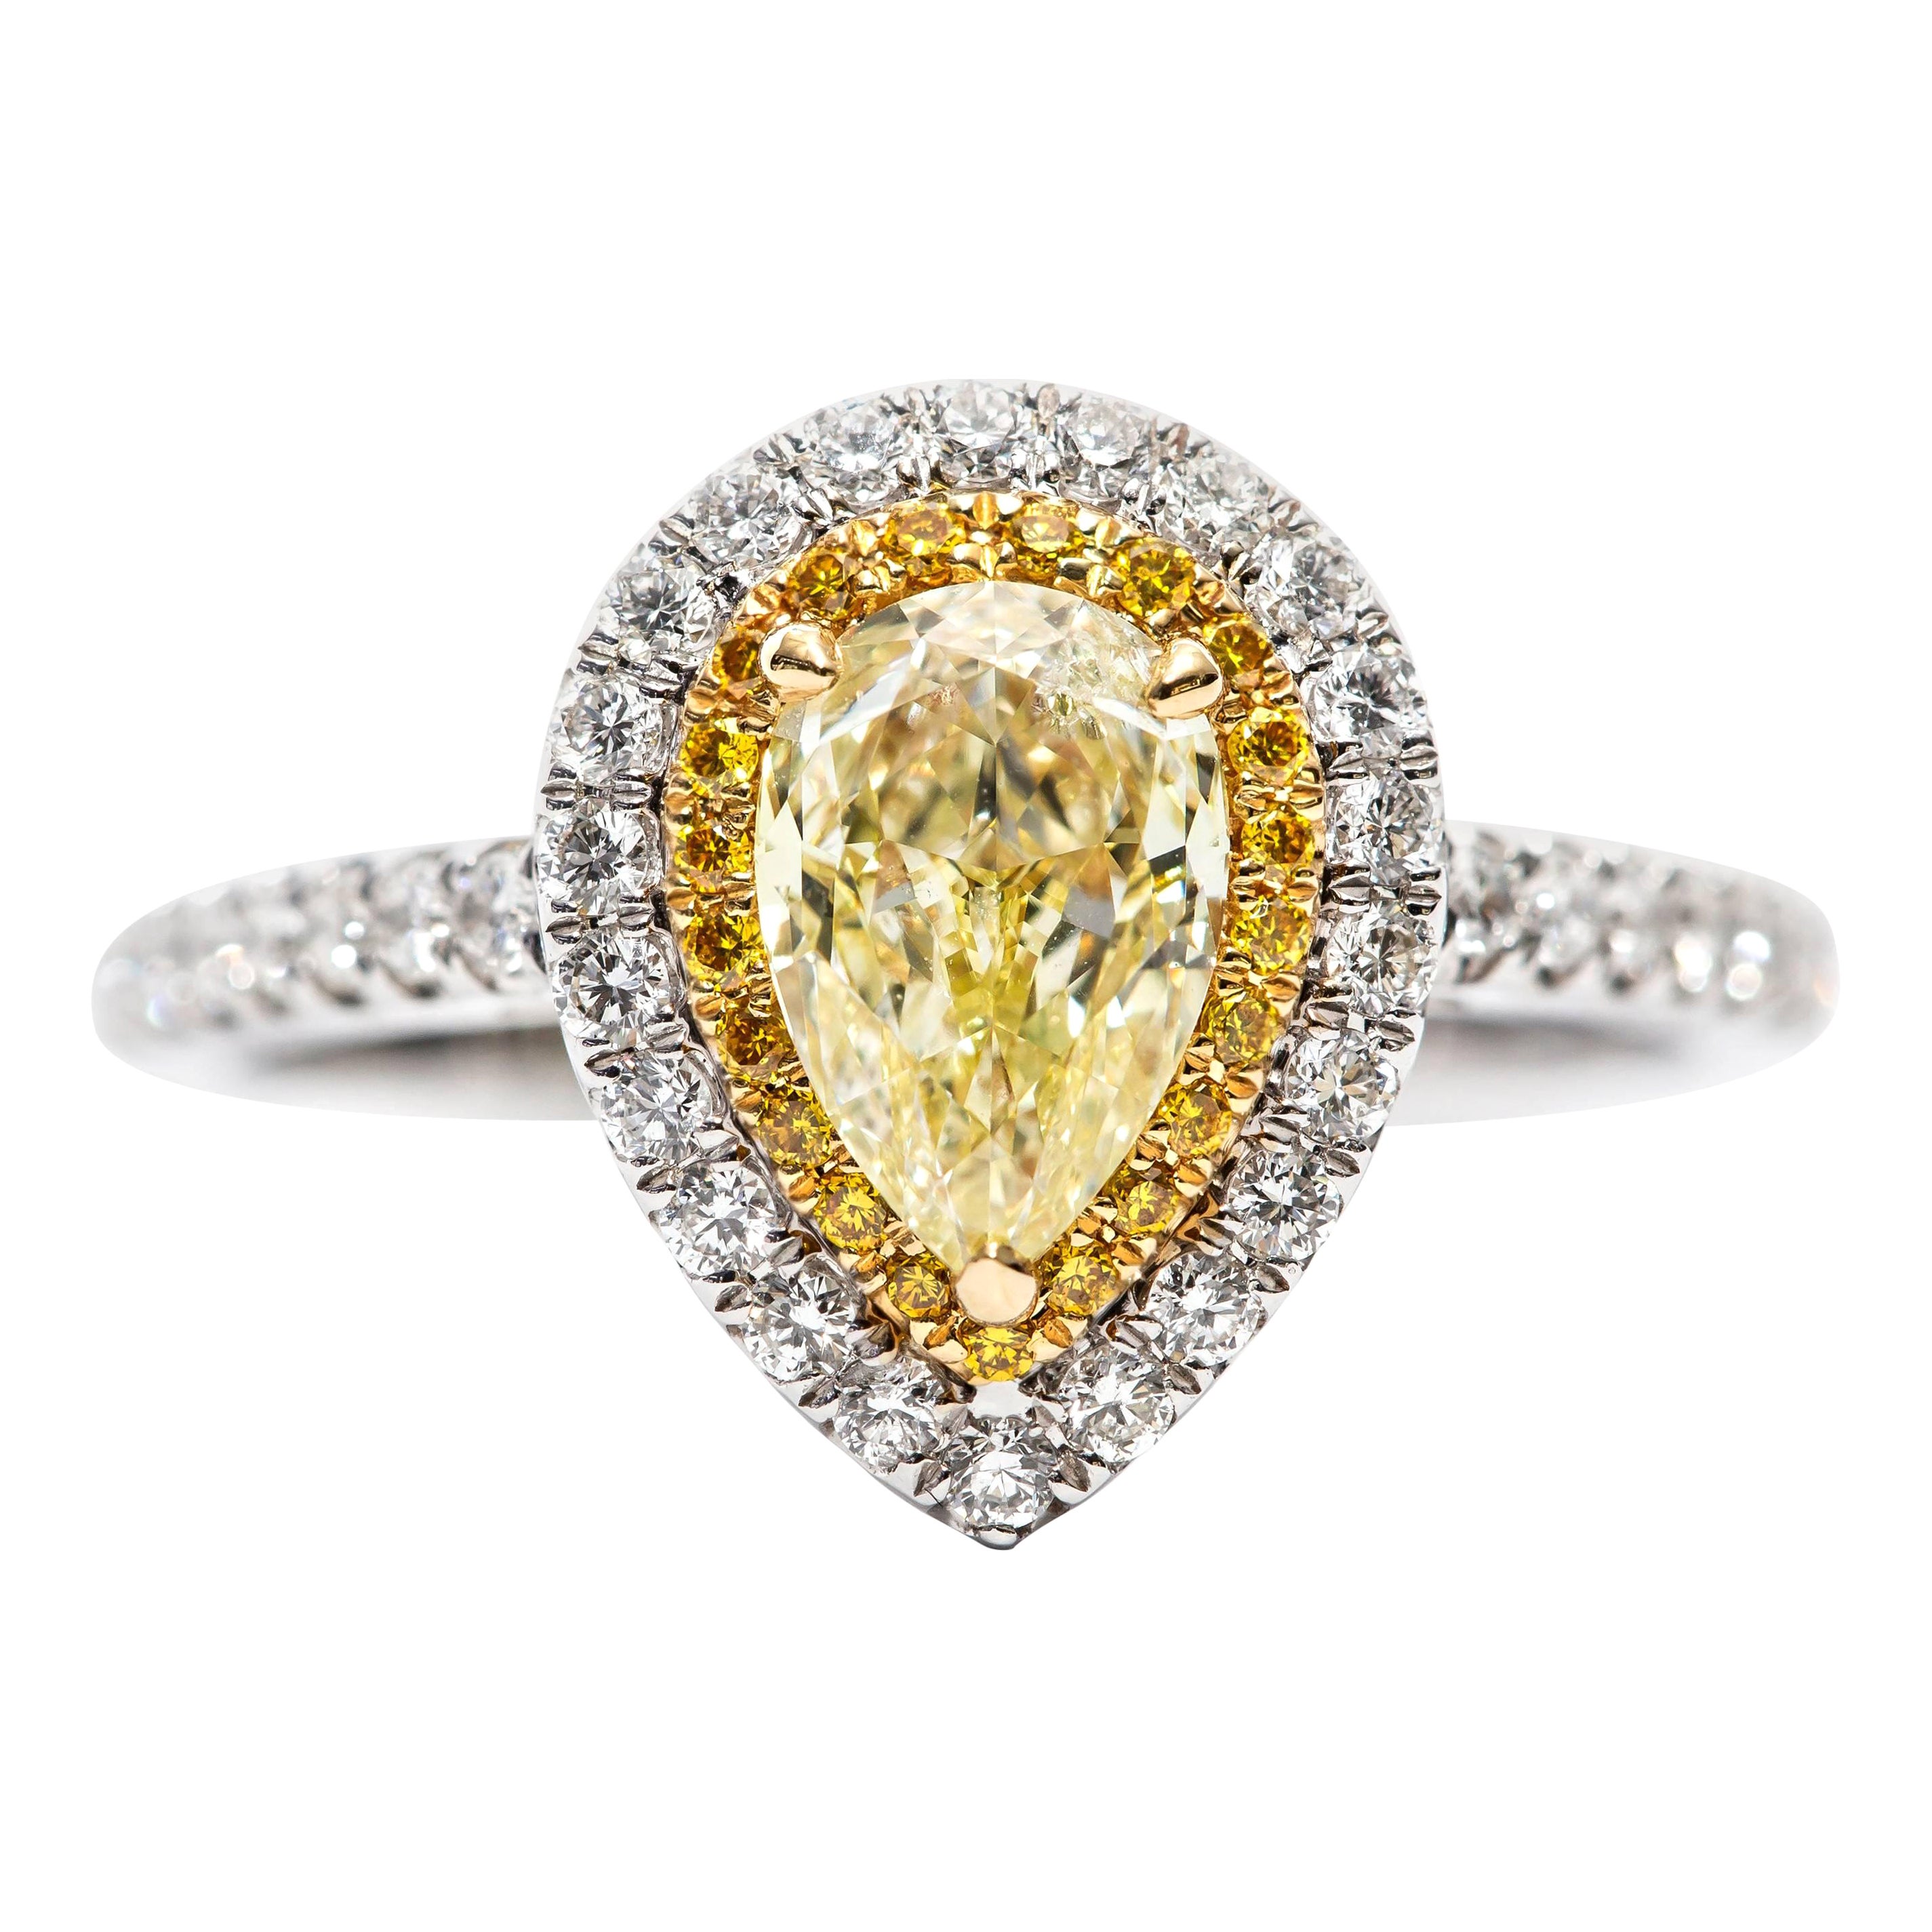 1.15ct GIA Fancy Yellow Pear Round Diamond Bespoke Double Halo Engagement Ring